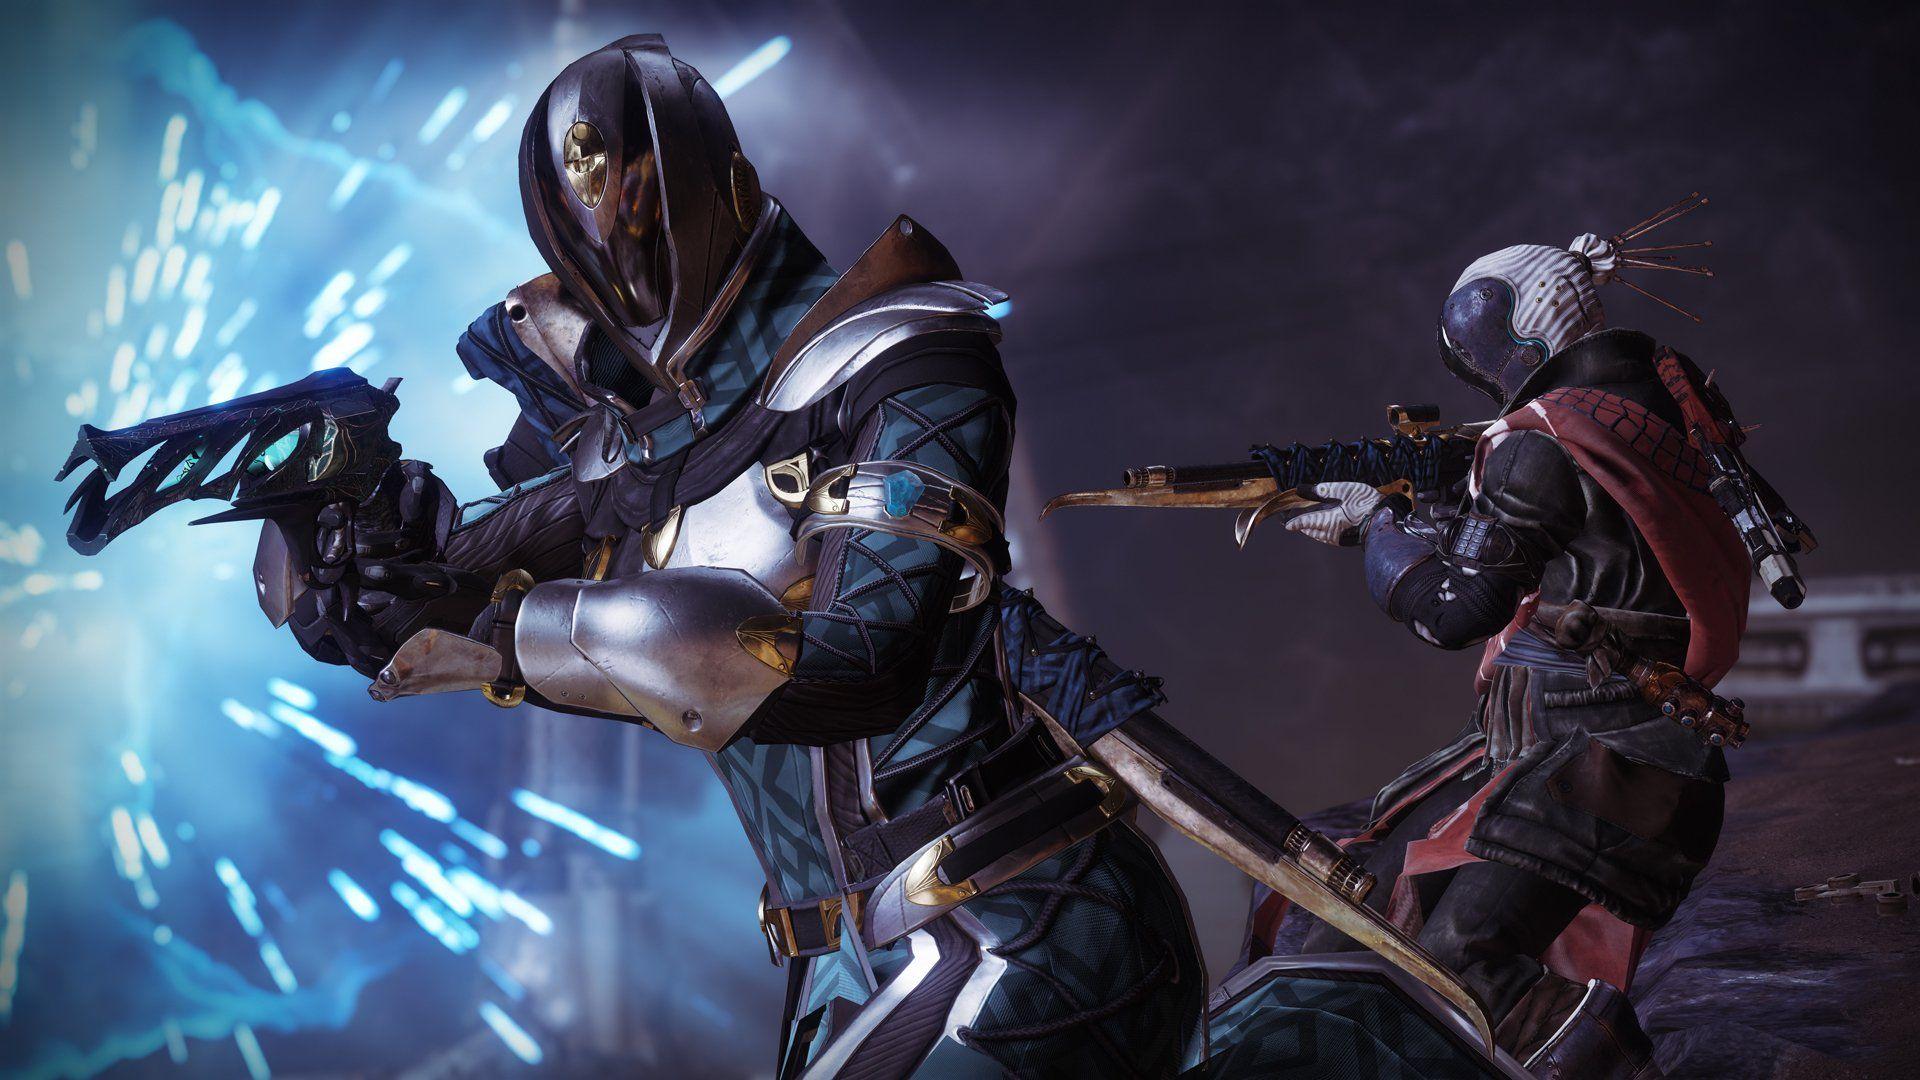 Black Armory coming to Destiny 2 on December 4